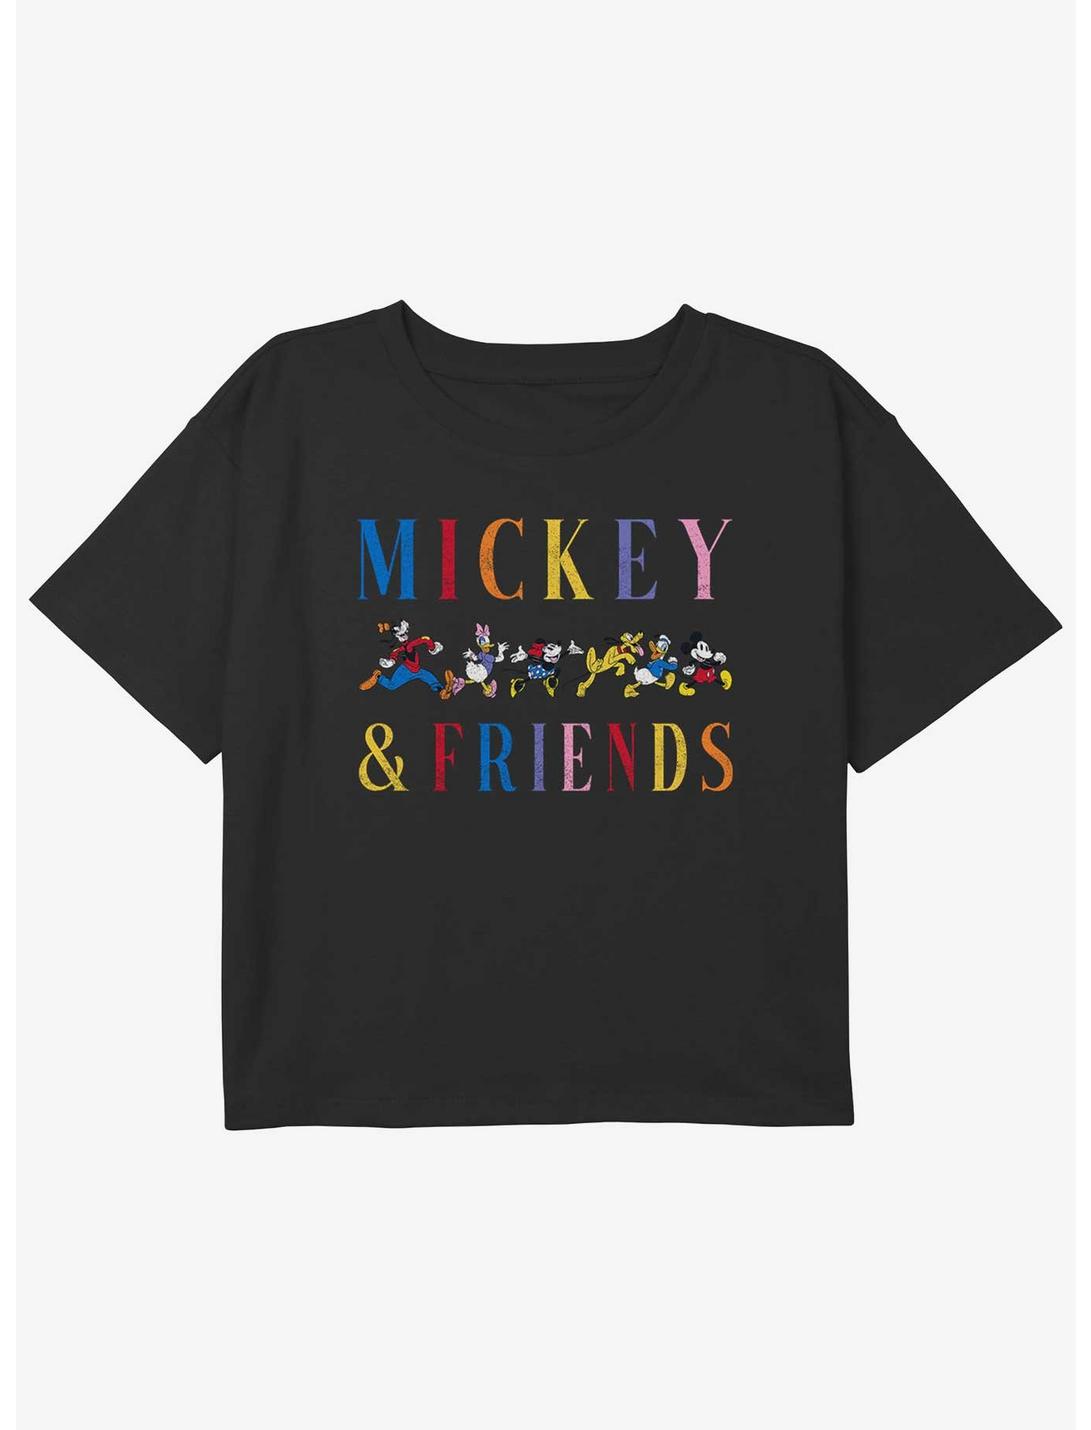 Disney Mickey Mouse Mickey & Friends Girls Youth Crop T-Shirt, BLACK, hi-res